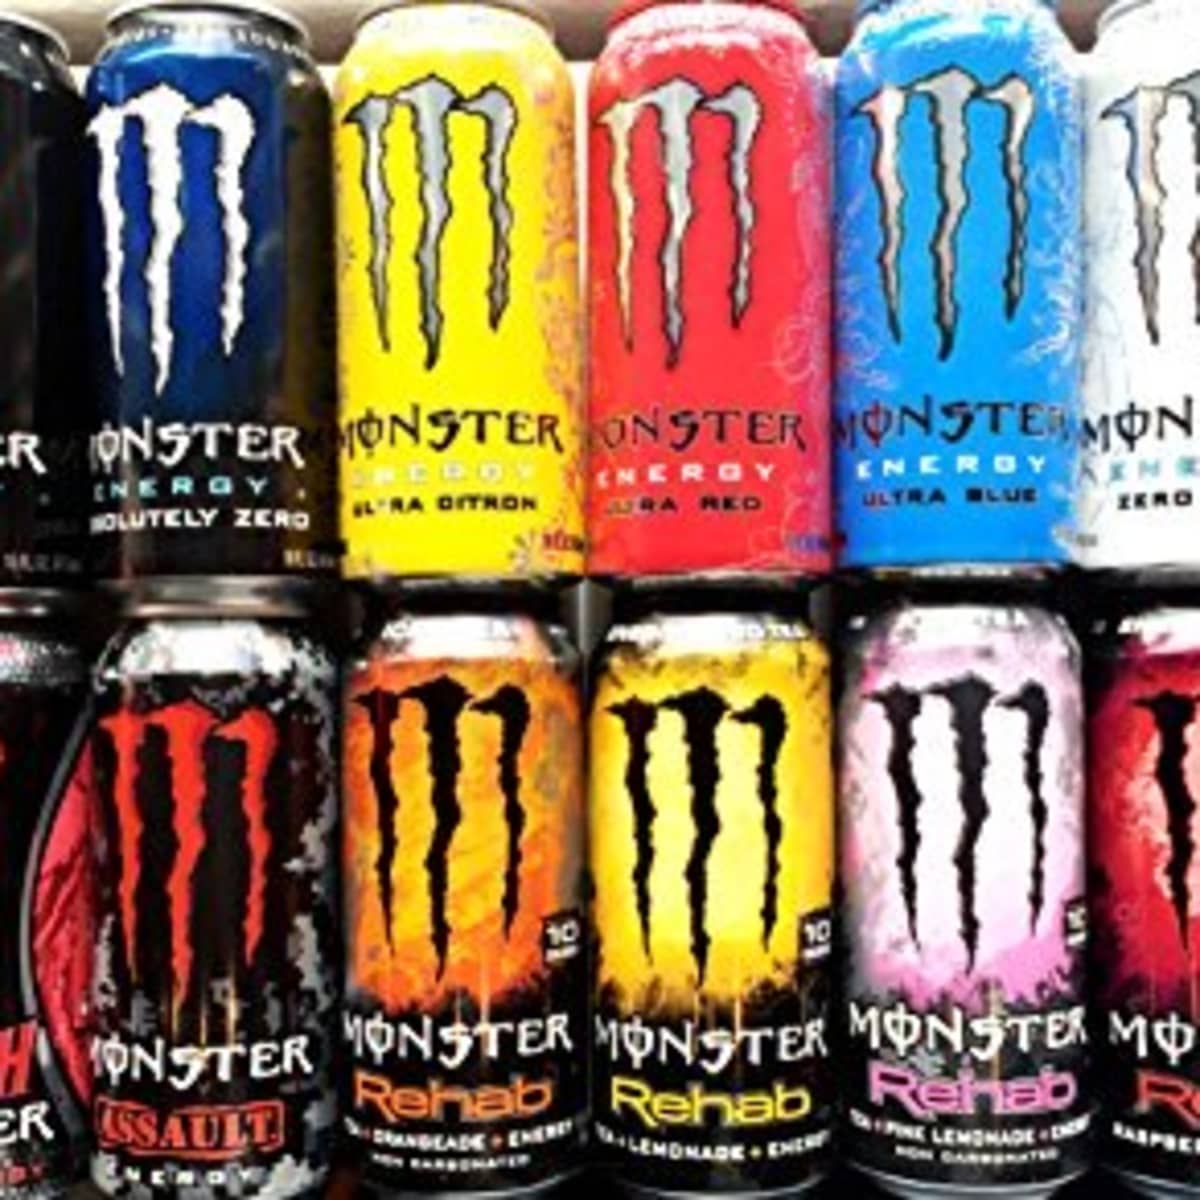 How much caffeine does Monster coffee have